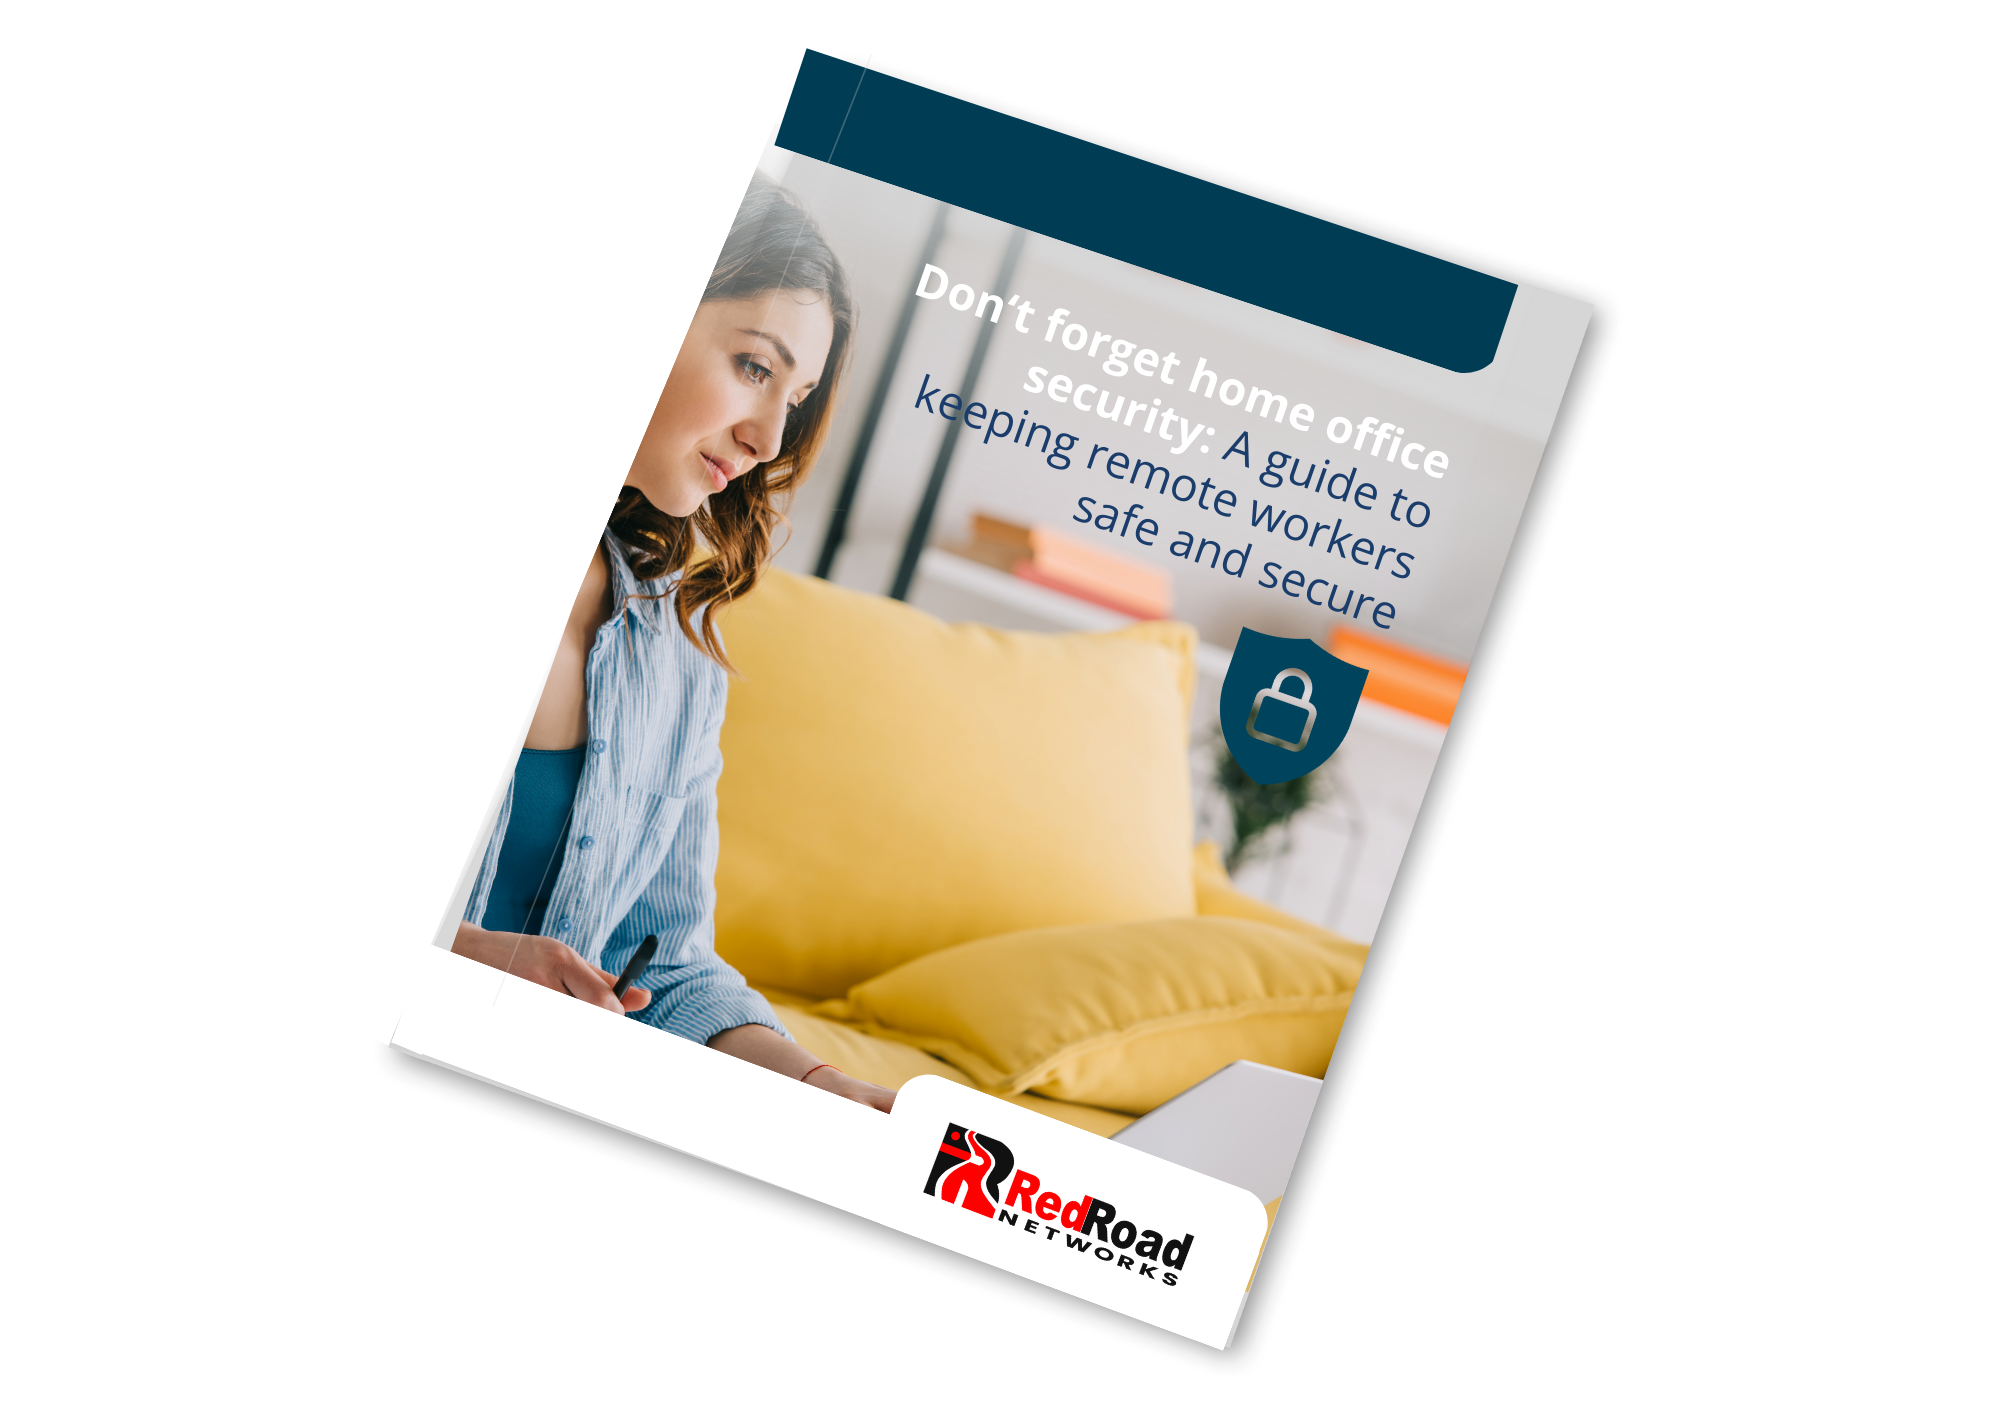 A guide to keeping remote workers safe and secure | Red Road Networks | Albuquerque